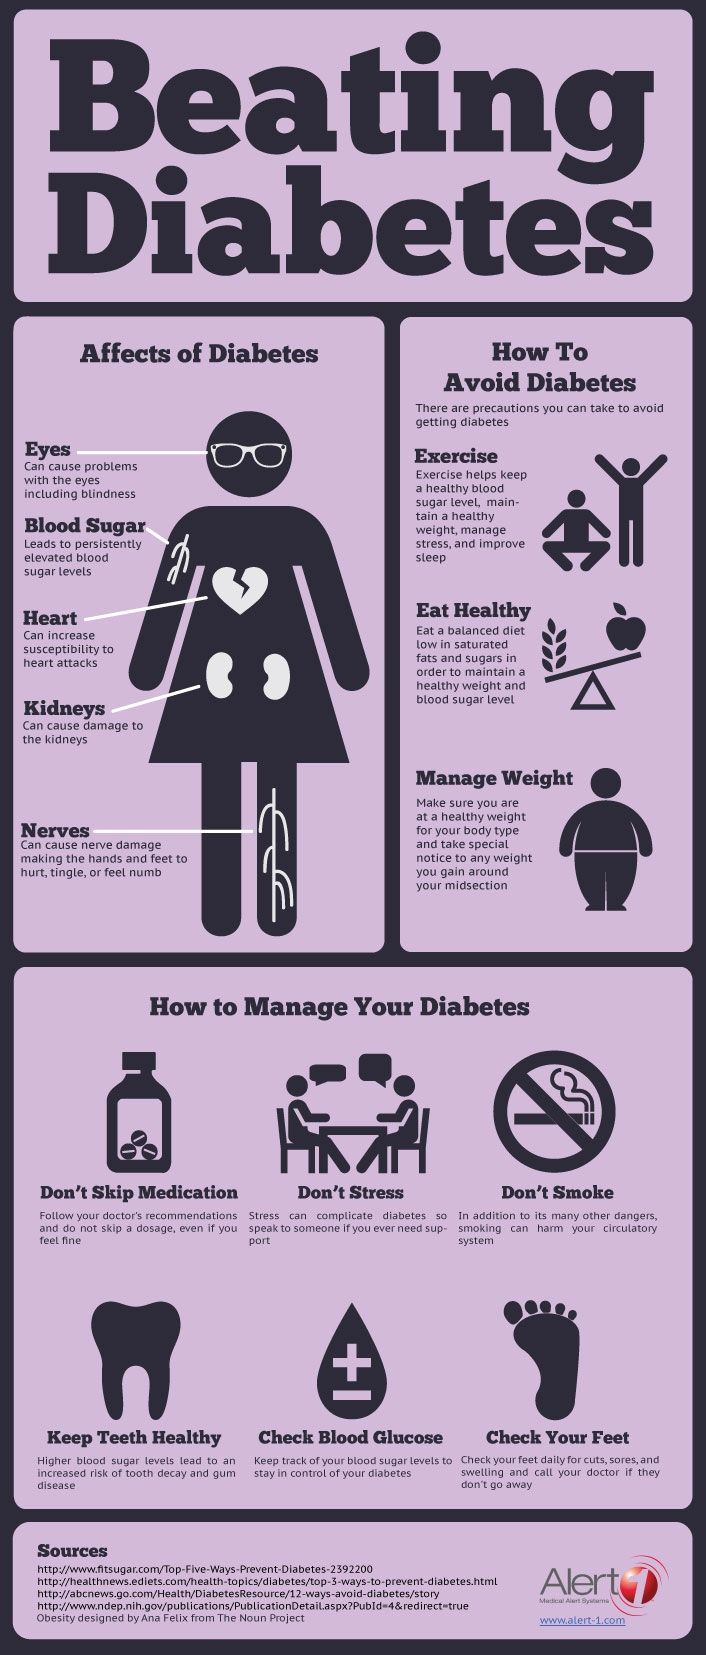 Beating Diabetes | Daily Infographic